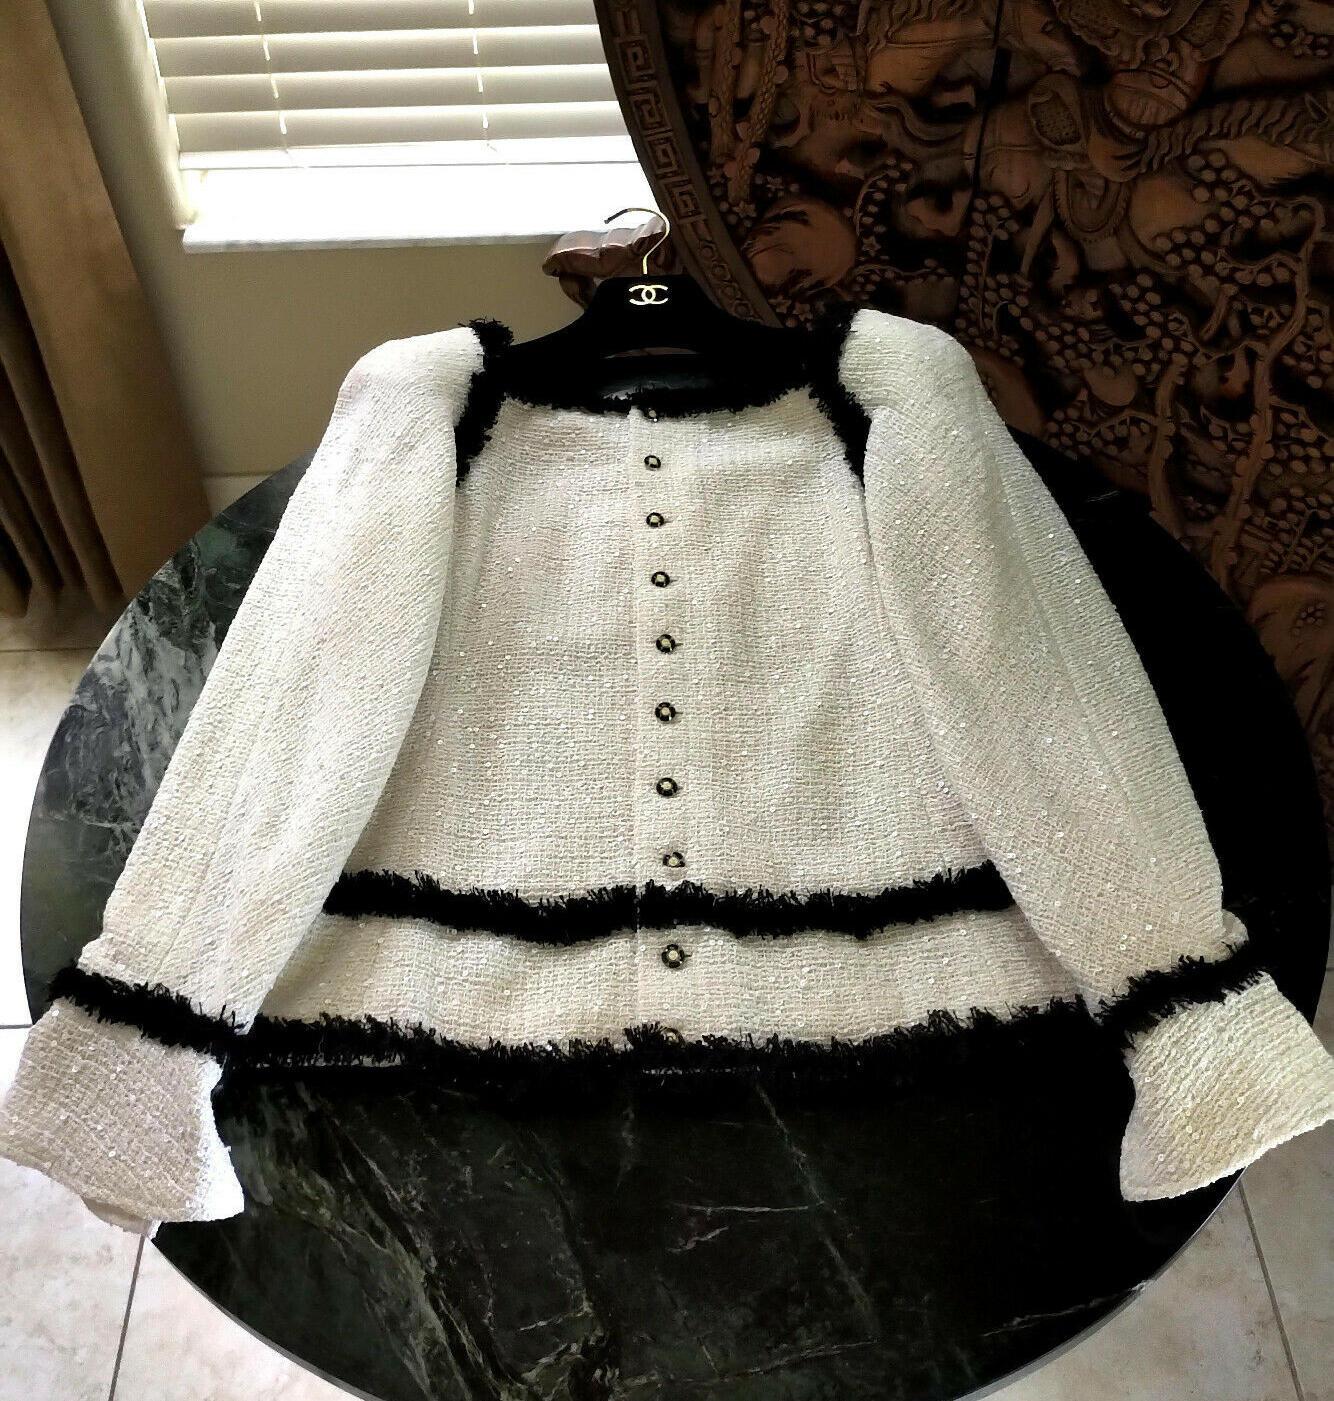 Chanel 2004 04P Ivory Sequin Tweed & Black Fringe Top Jacket FR 36/ US 2 4 In Excellent Condition For Sale In Ormond Beach, FL